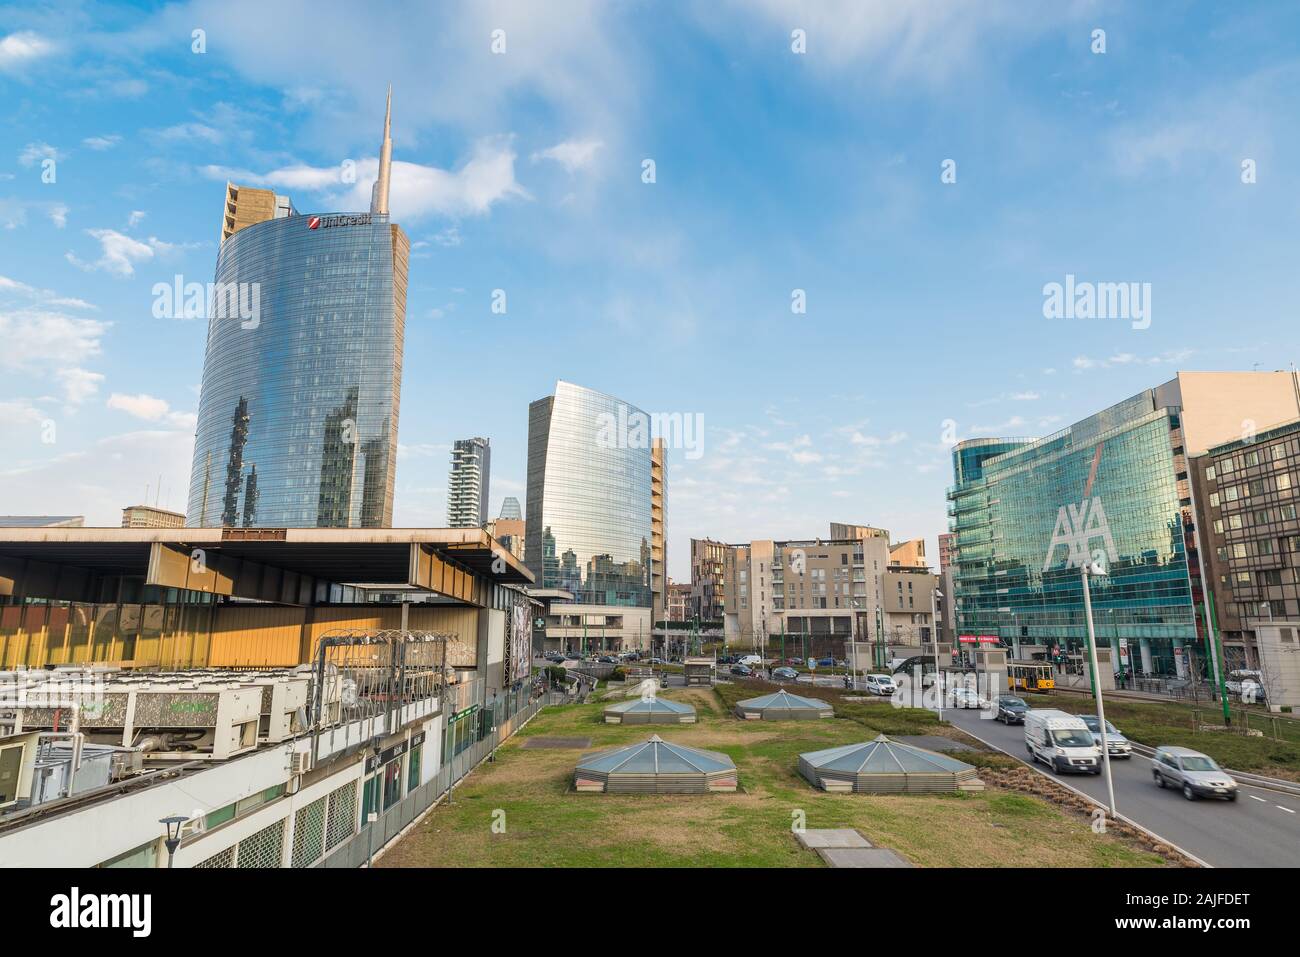 Milan, Italy. Square Gae Aulenti with the tallest skyscraper in Italy. Important financial district Stock Photo